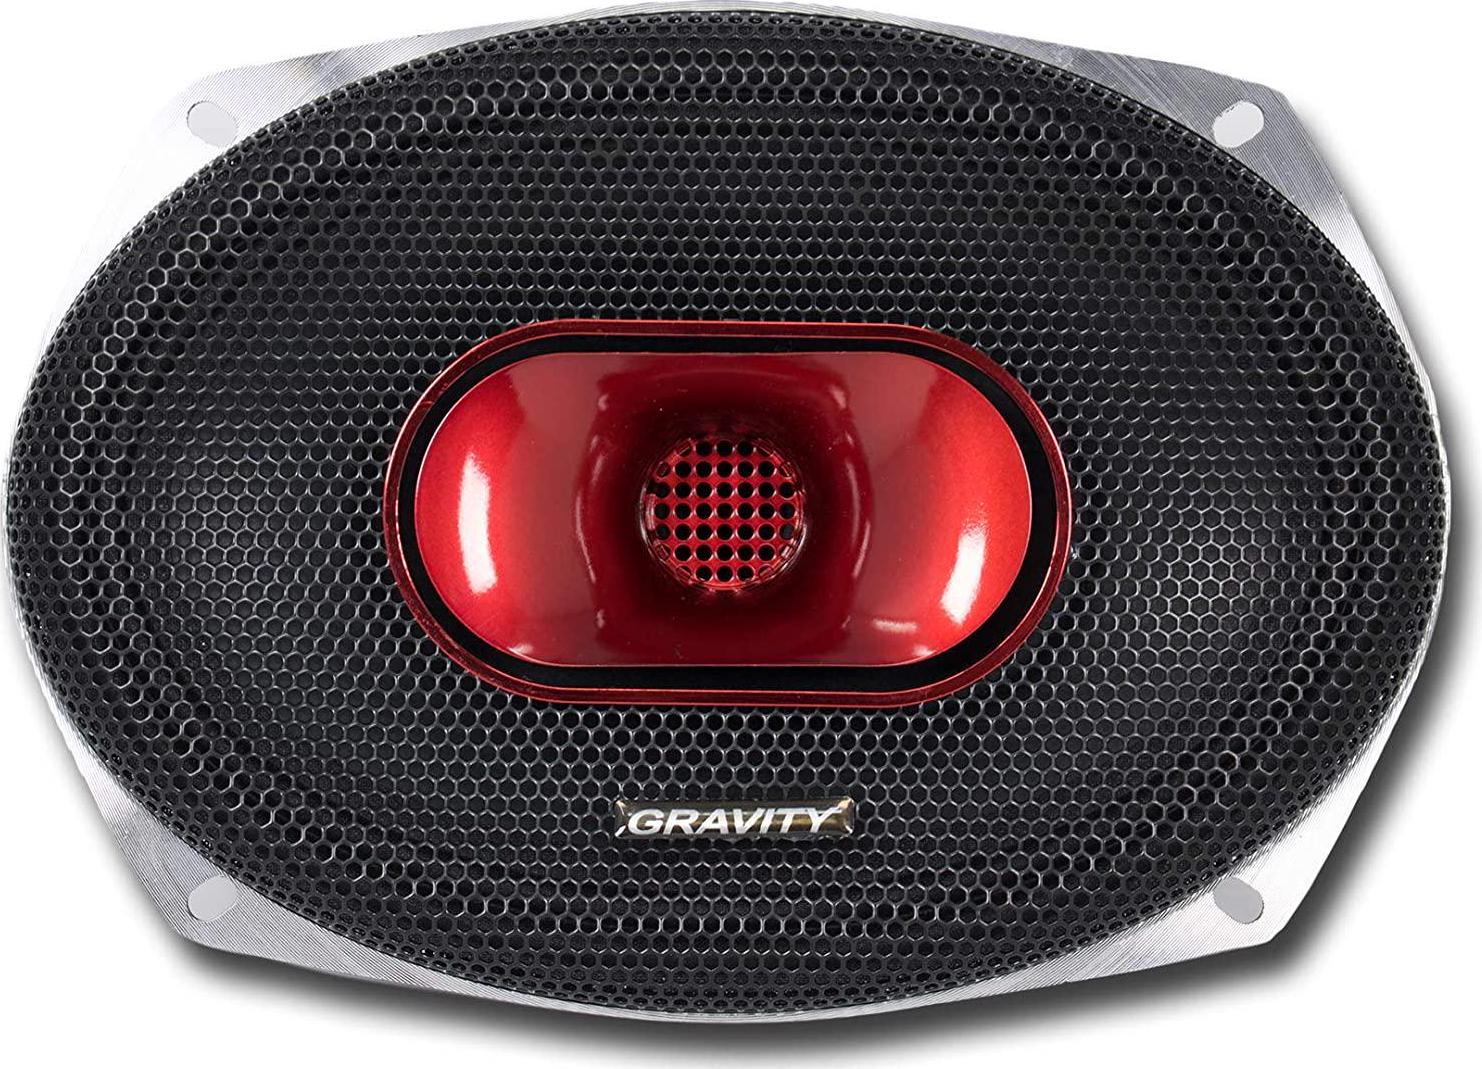 Gravity Professional, Gravity WZP69 Warzone Series 6x9 inch 4 Ohm Pro Midrange Coaxial Loud Corrugated Surround Speaker 4-Ohms with 800W Max, 1 Speaker Car Audio High Standard Reliability Testing